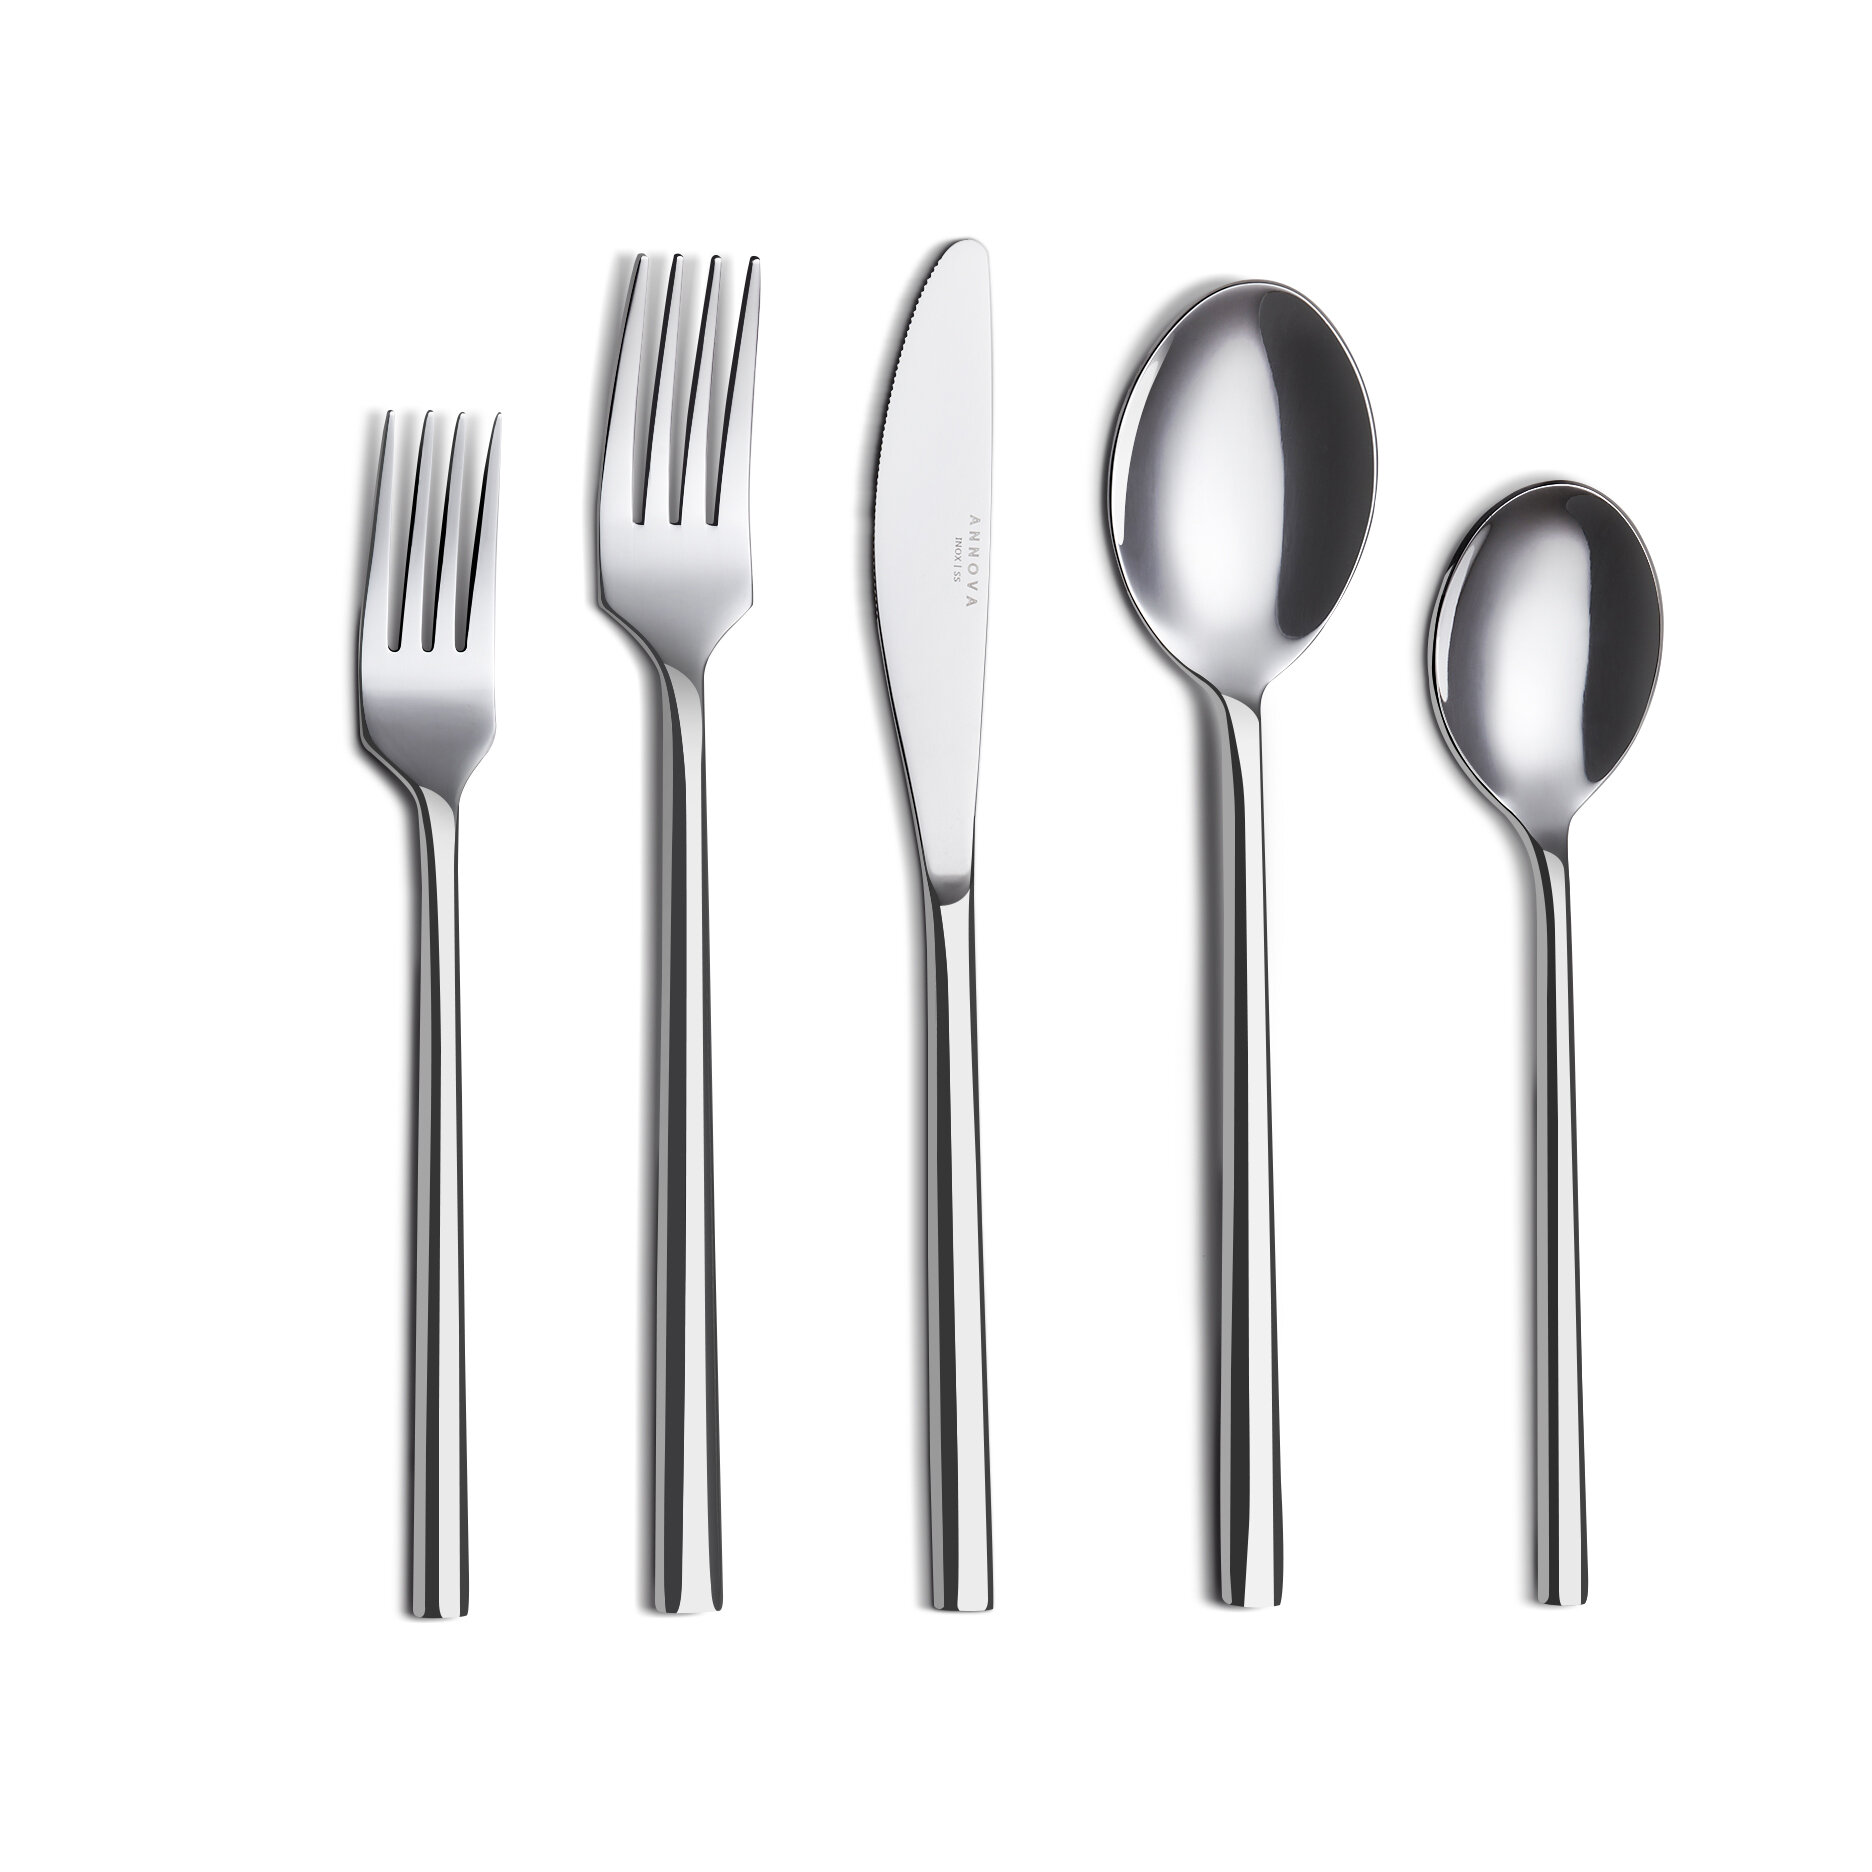 Color Handles Service for 4 ANNOVA 20 Pieces Stainless Steel Flatware/Cutlery Silverware Set 4 Teaspoons 4 Forks Turquoise, 20 Pieces 4 Knives 4 Salad Forks 4 Dinner Spoons